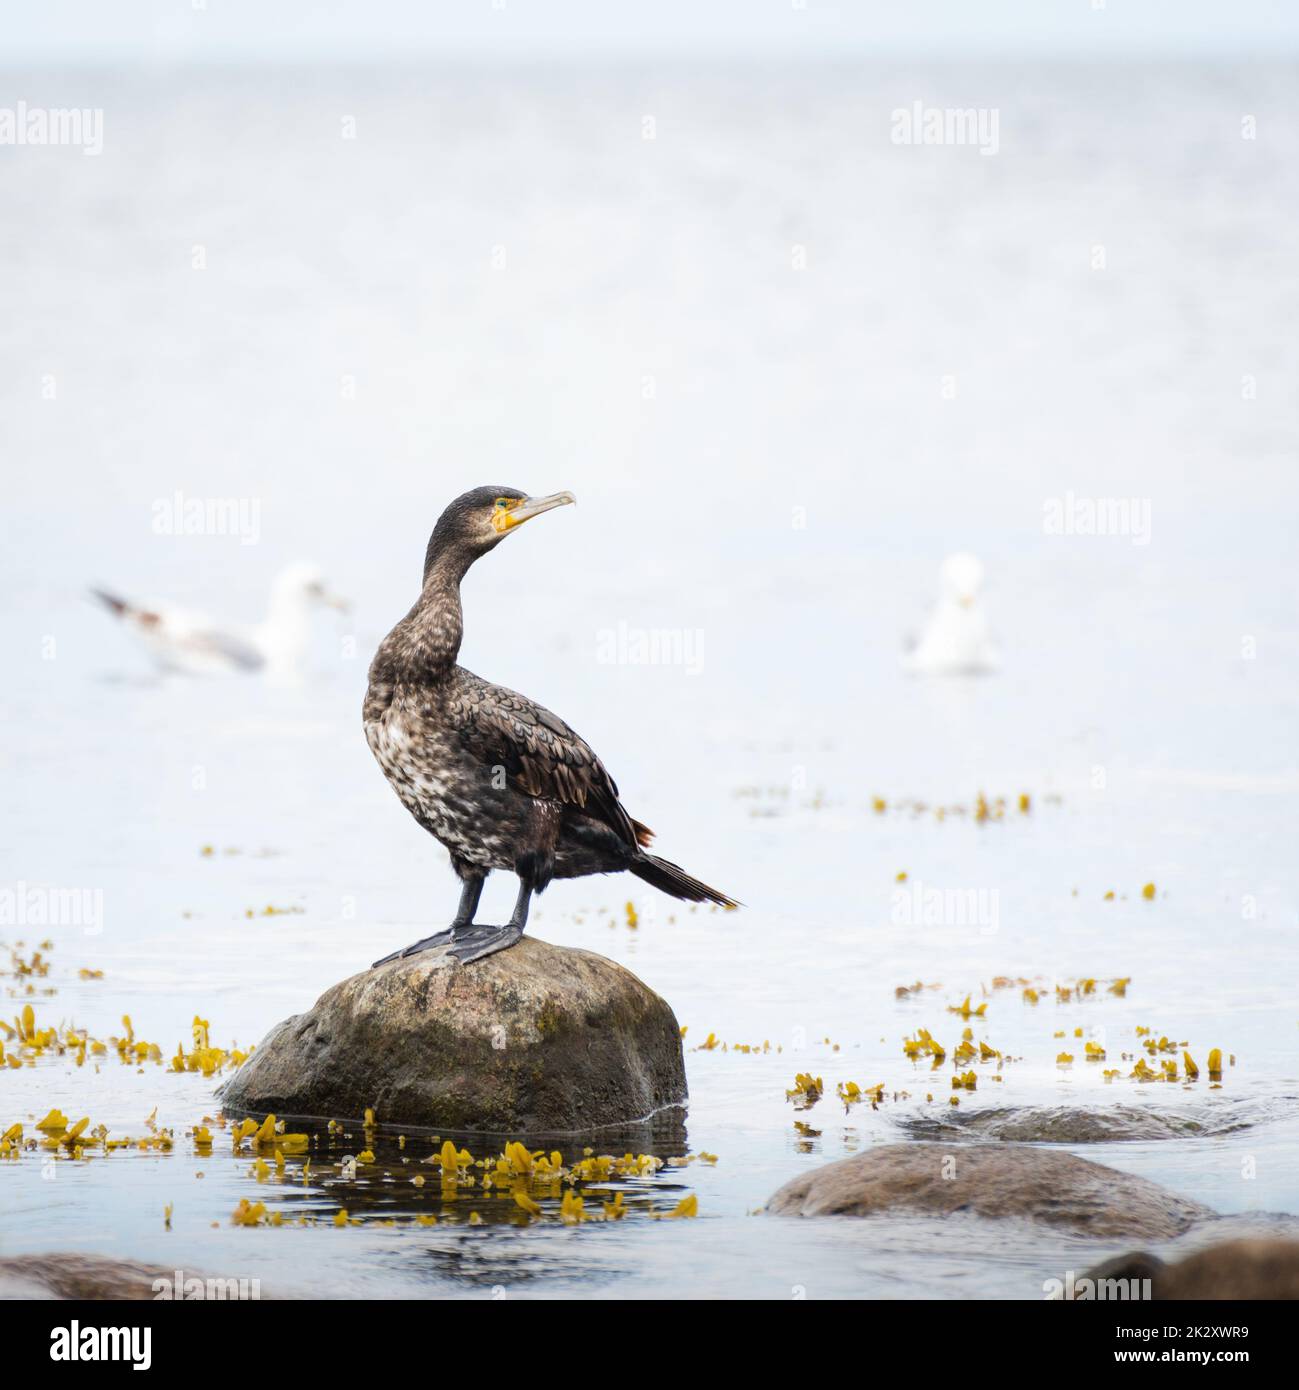 Great cormorant, Phalacrocorax carbo, standing in water on the sea shore, isolated on white background. The great cormorant, Phalacrocorax carbo, known as the great black cormorant, or the black shag. Stock Photo